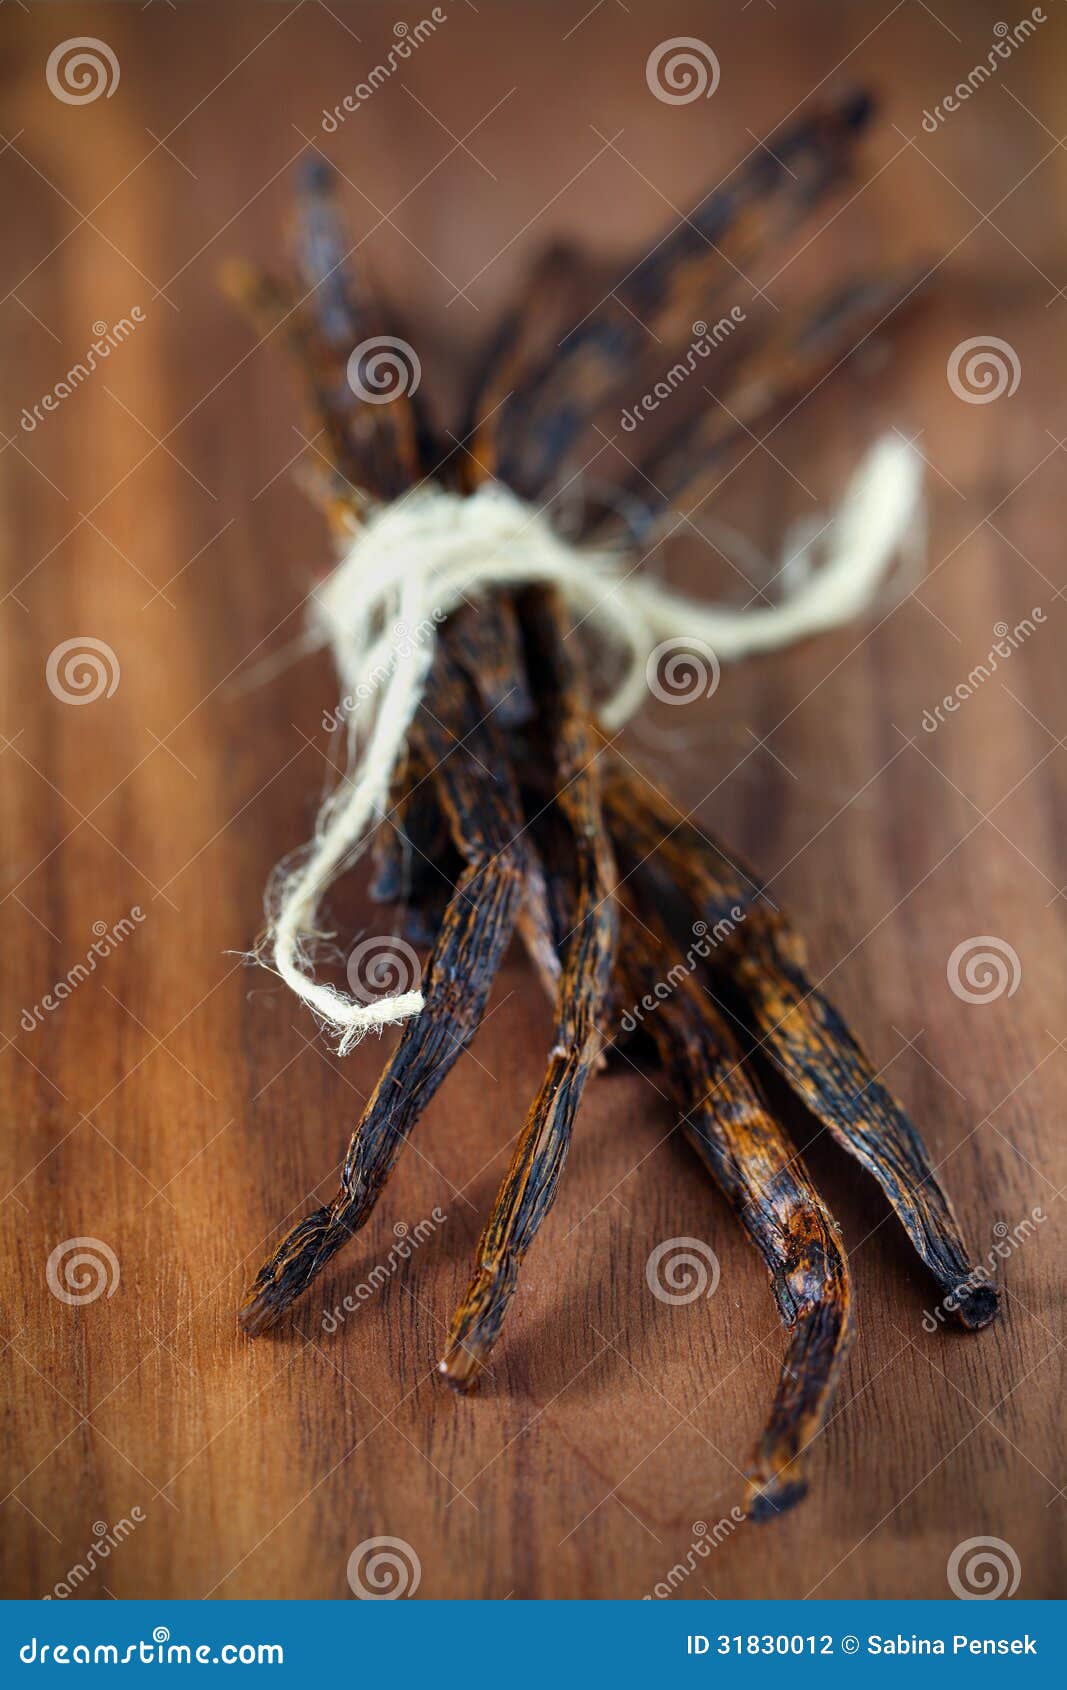 vanilla bunch, dried pods fragrant spice from india